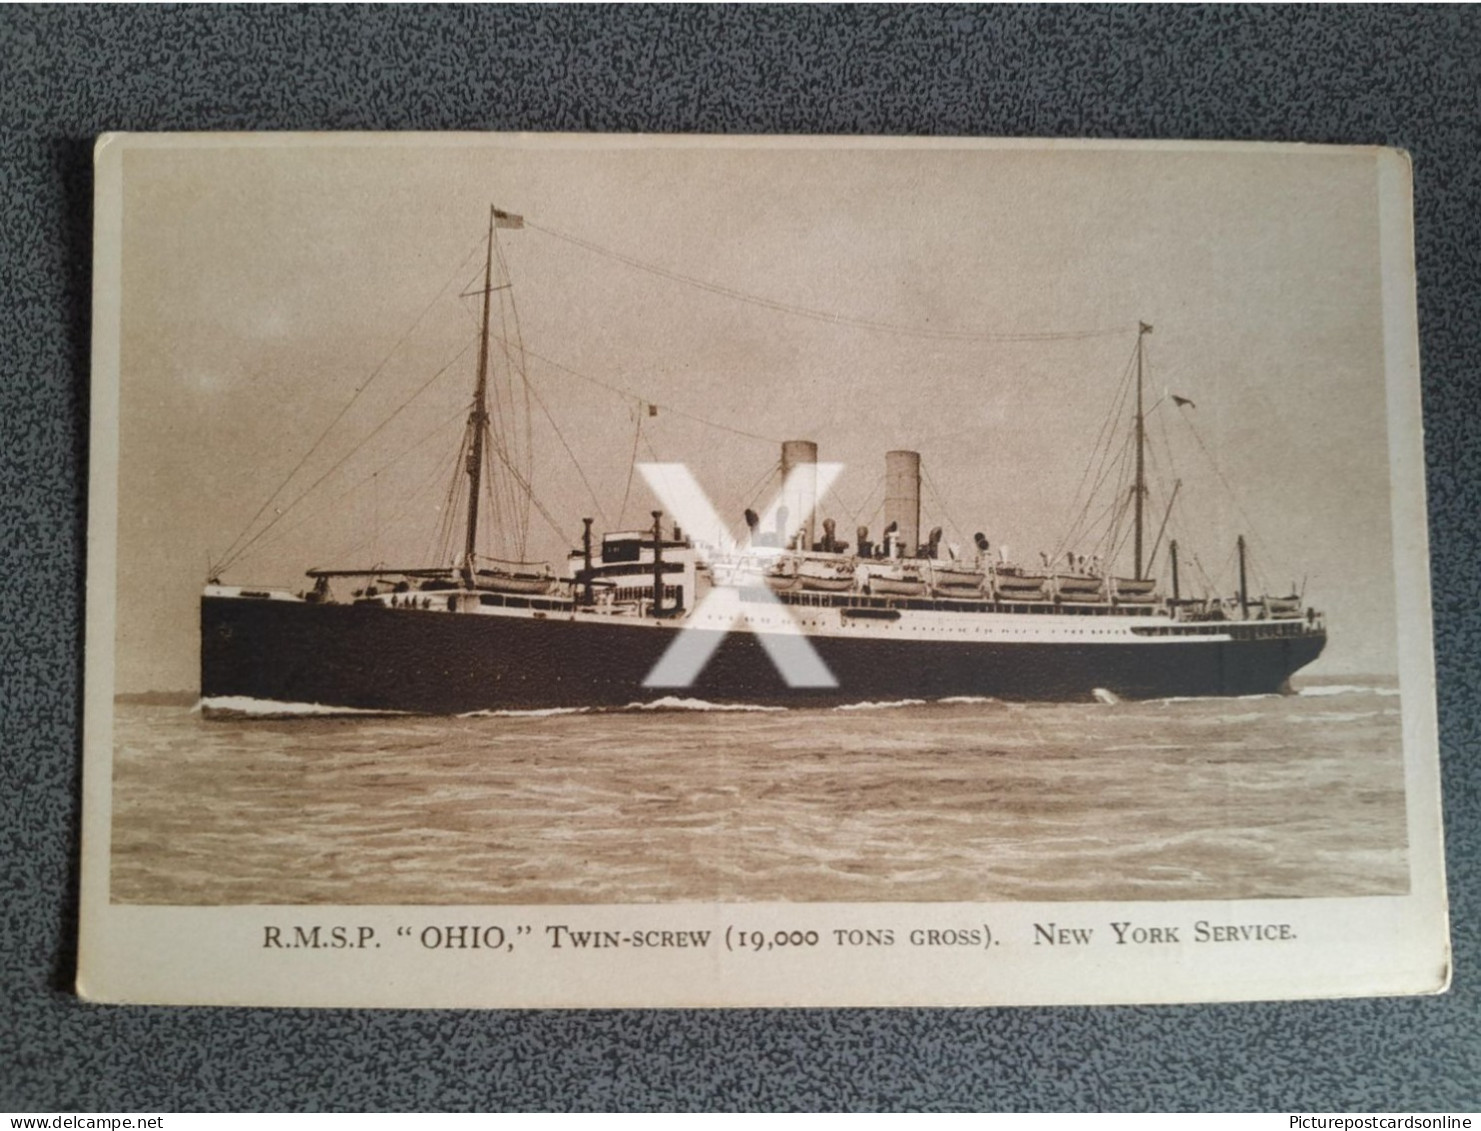 ROYAL MAIL STEAM PACKET OHIO OLD B/W POSTCARD STEAMER SHIPPING NEW YORK SERVICE RMSP AGENT HOSPITAL STREET PERTH - Paquebote